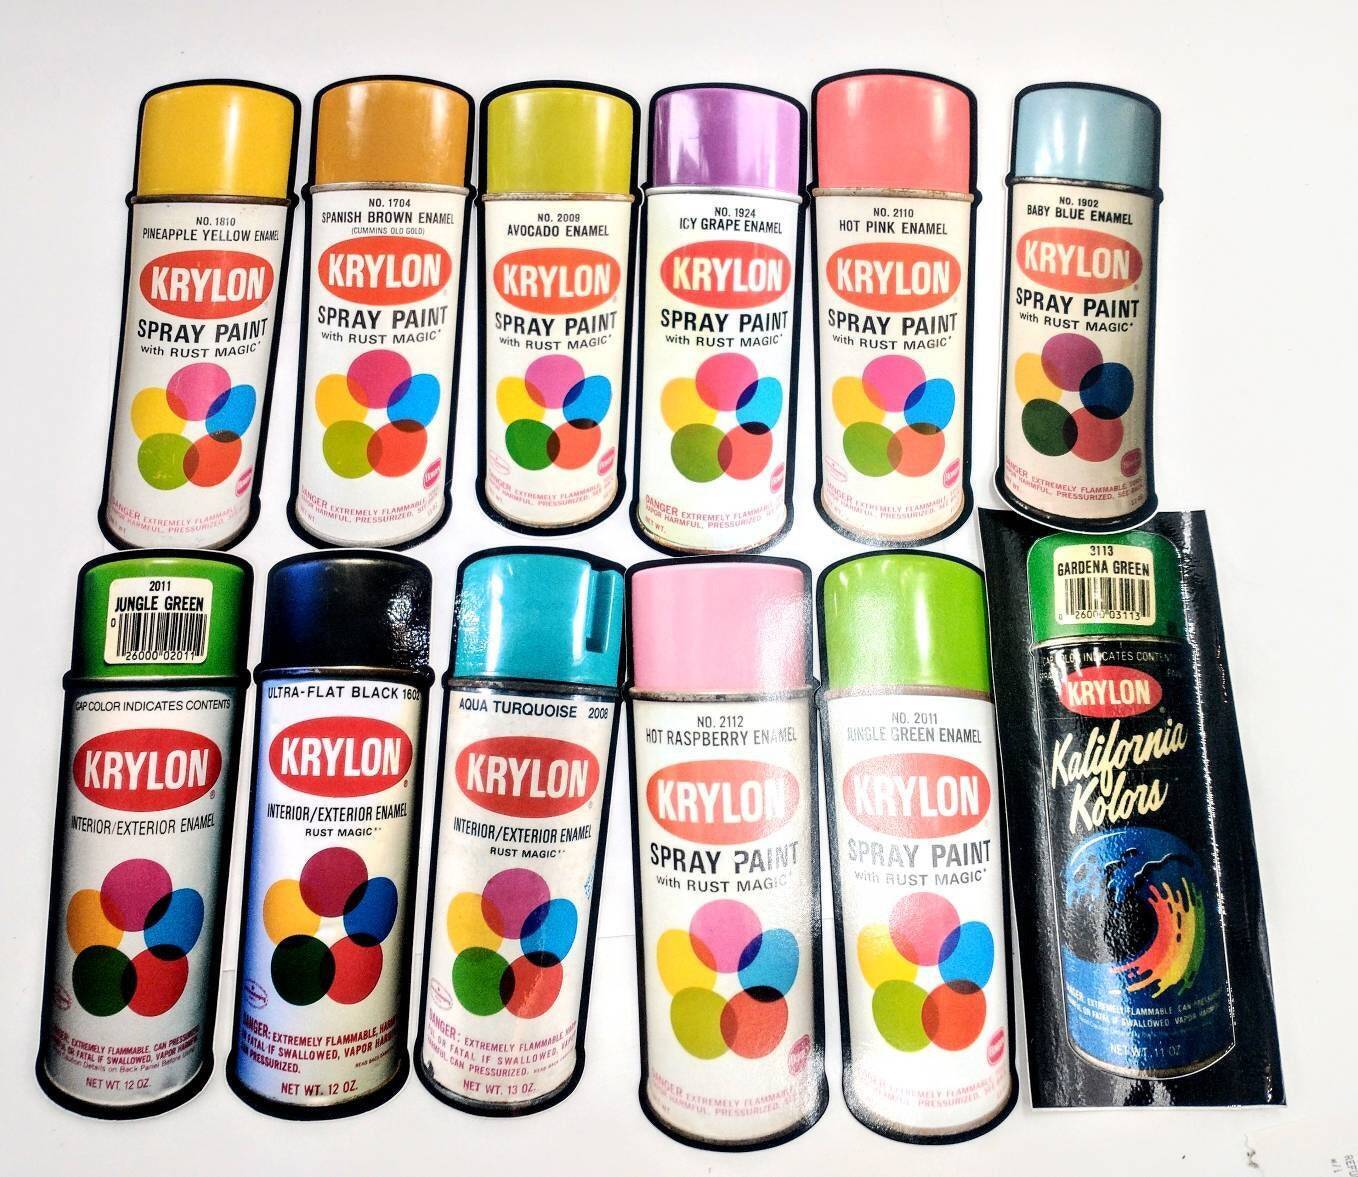 (1) Spray Paint Can Stickers, Graffiti, Street Art Stickers, Classic and